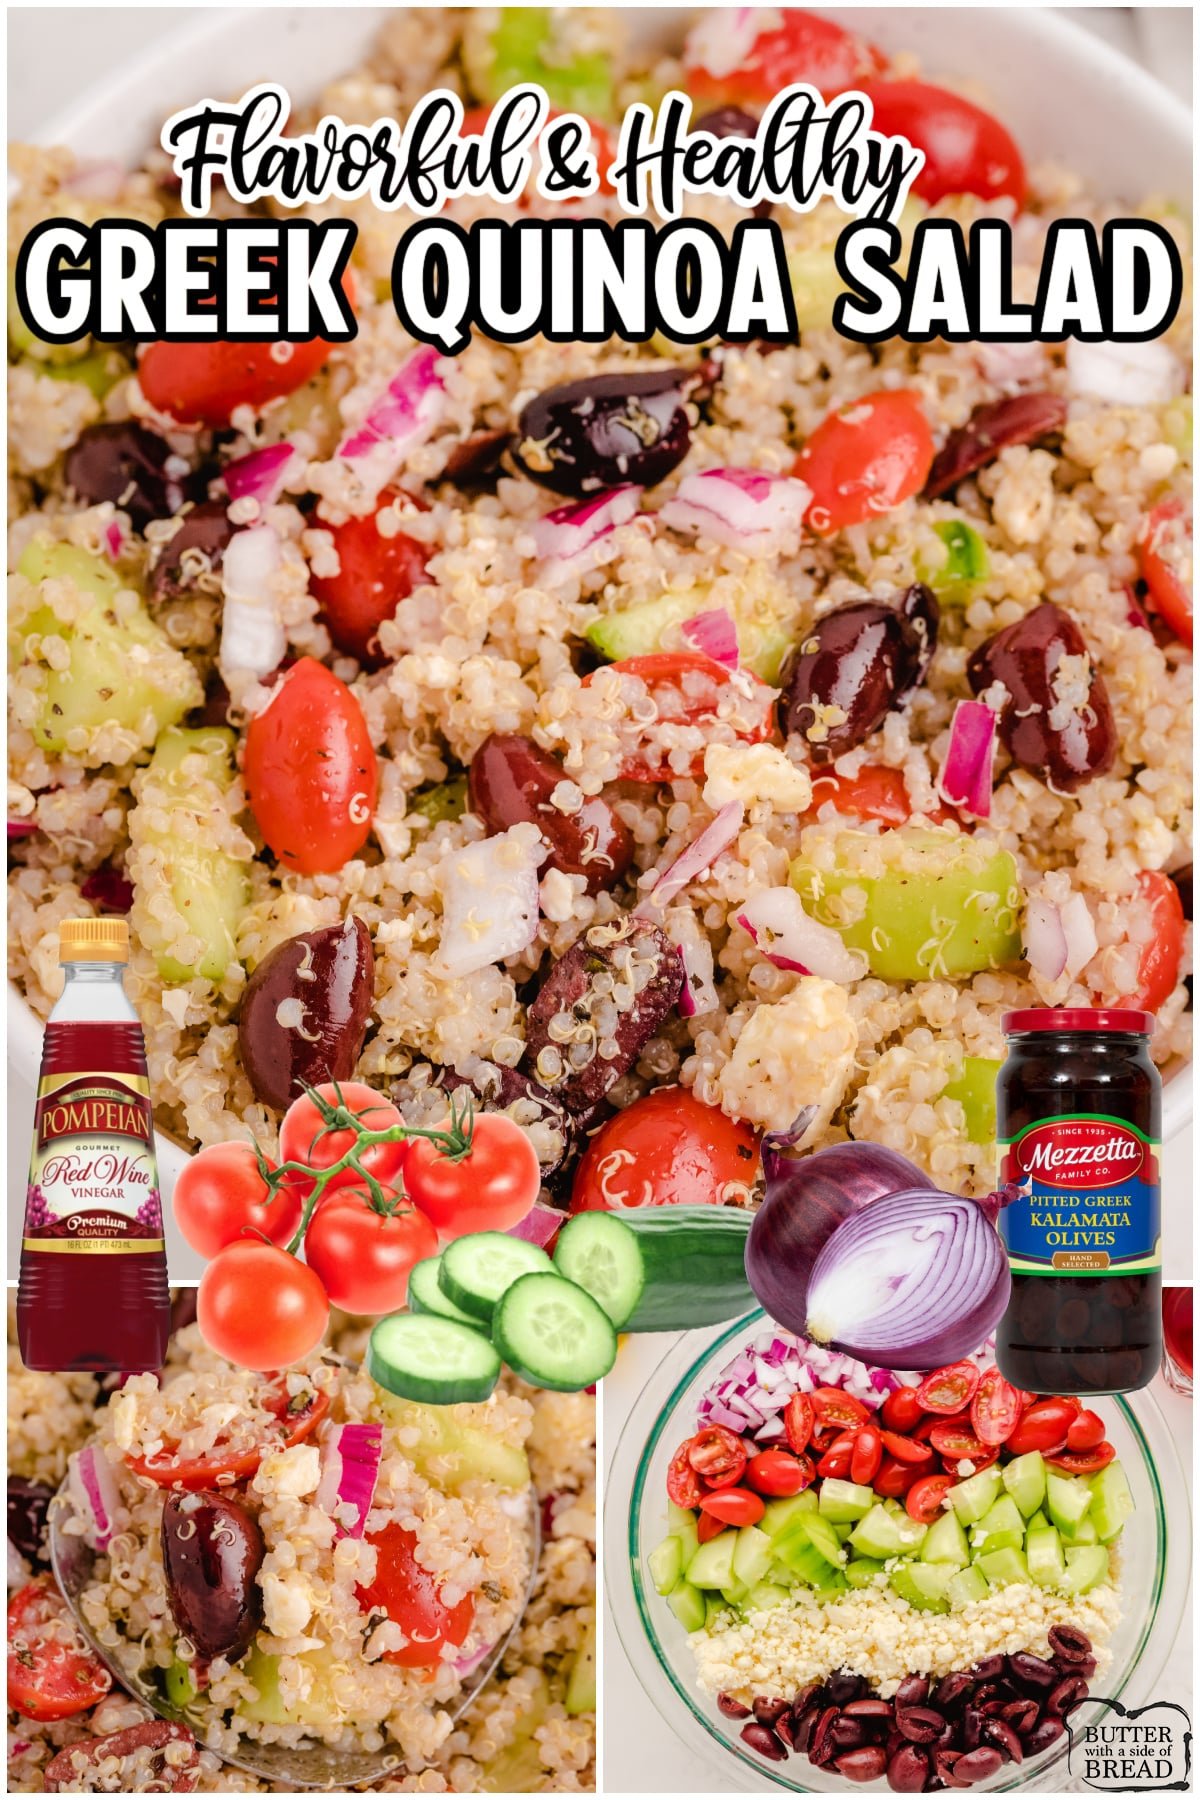 Greek Quinoa Salad is a healthy, flavorful salad made with quinoa, cucumbers, feta, tomatoes & olives! This Mediterranean quinoa salad is a great side dish or lunch!